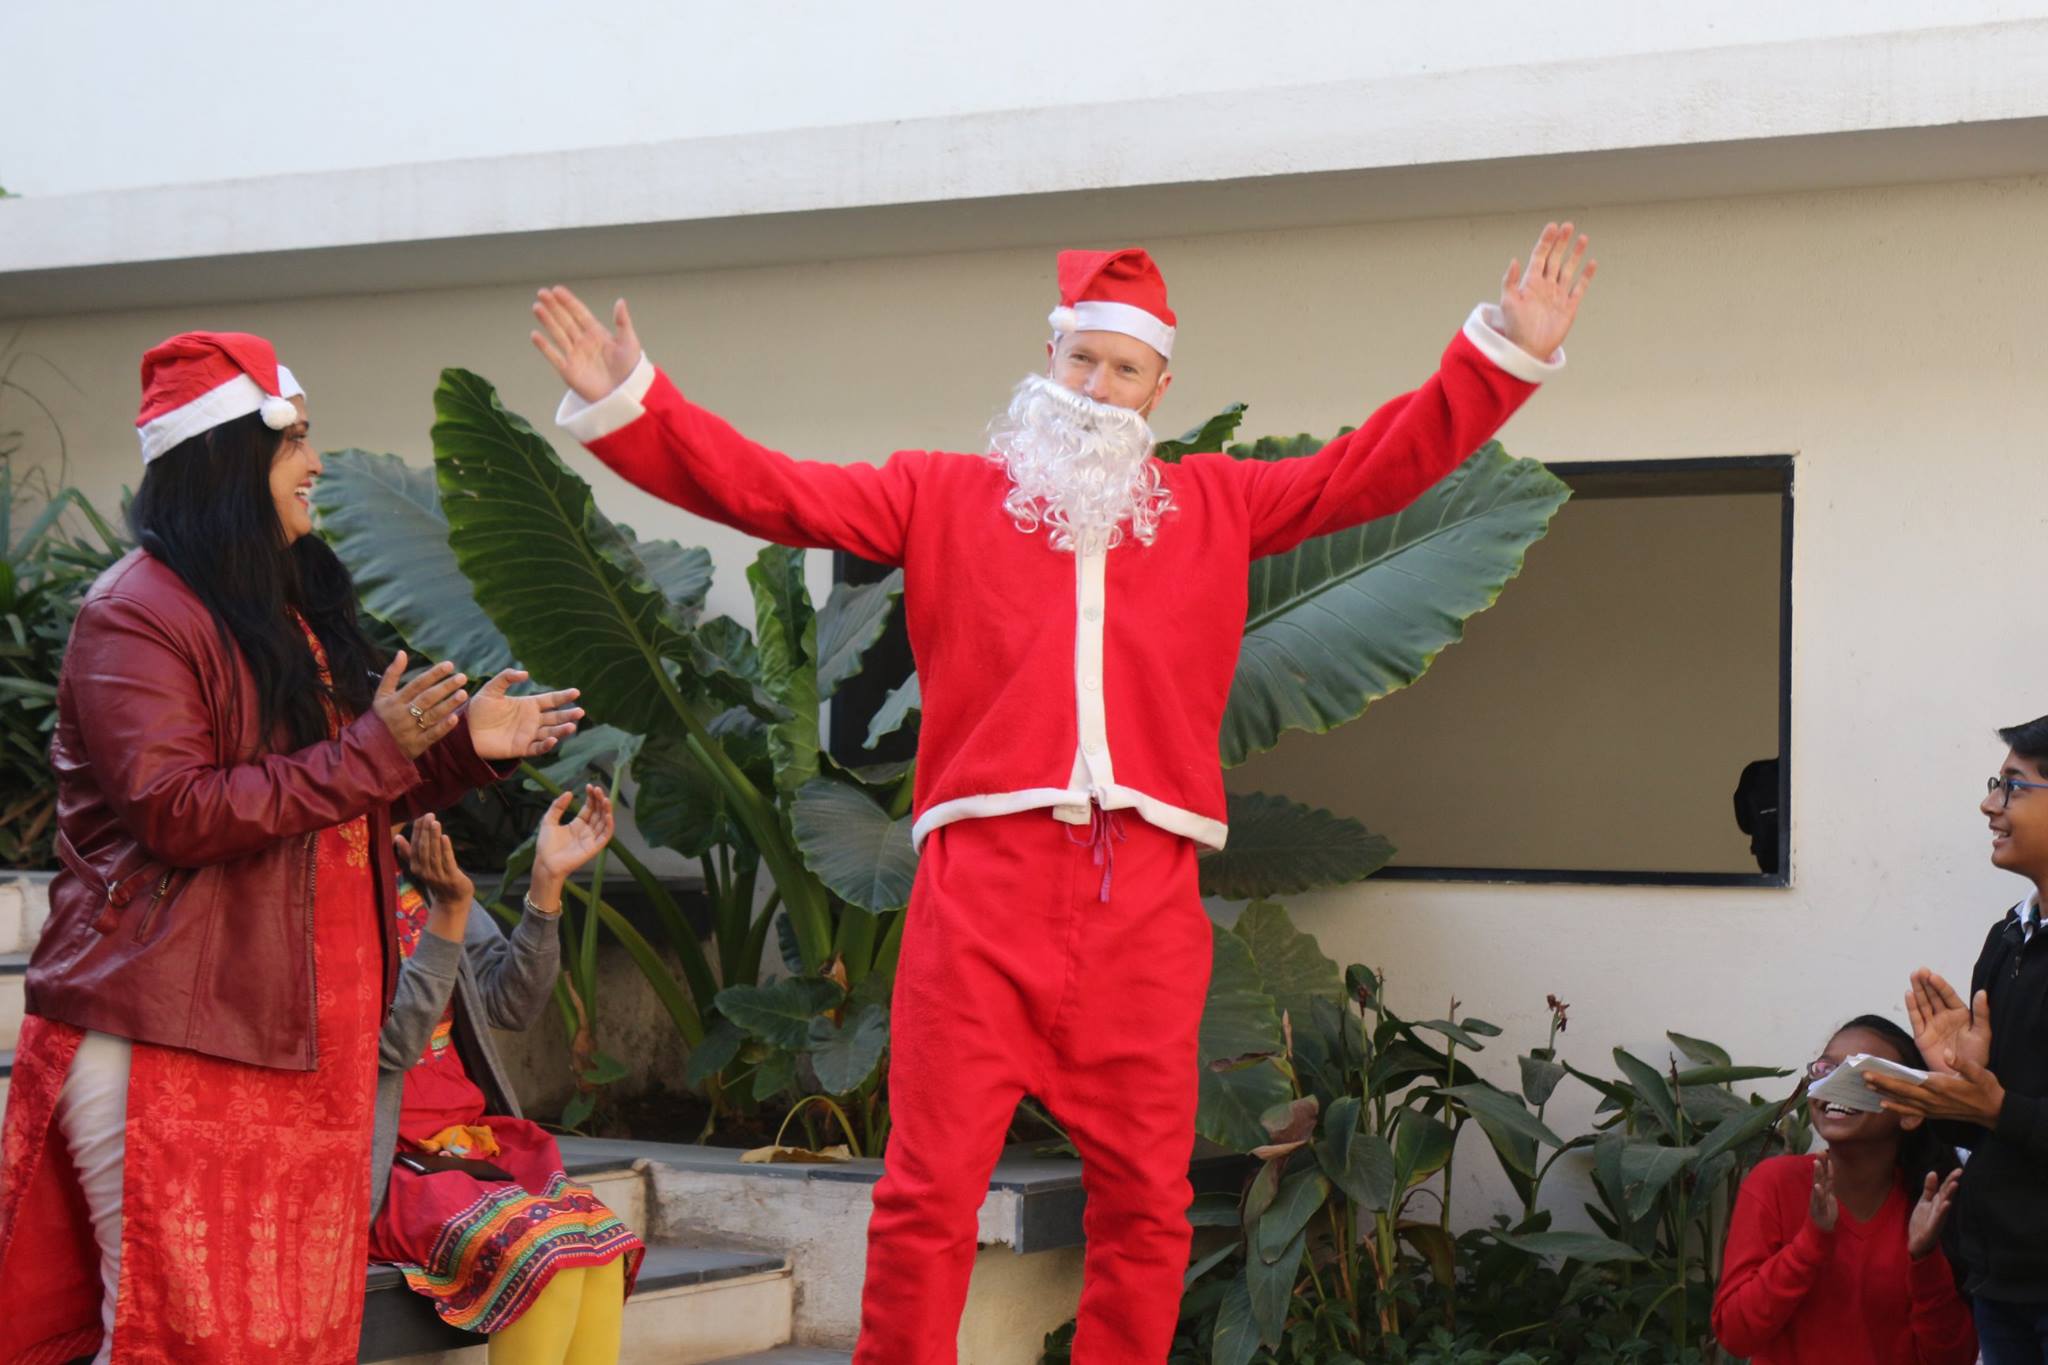 Christmas celebration at The Northstar School